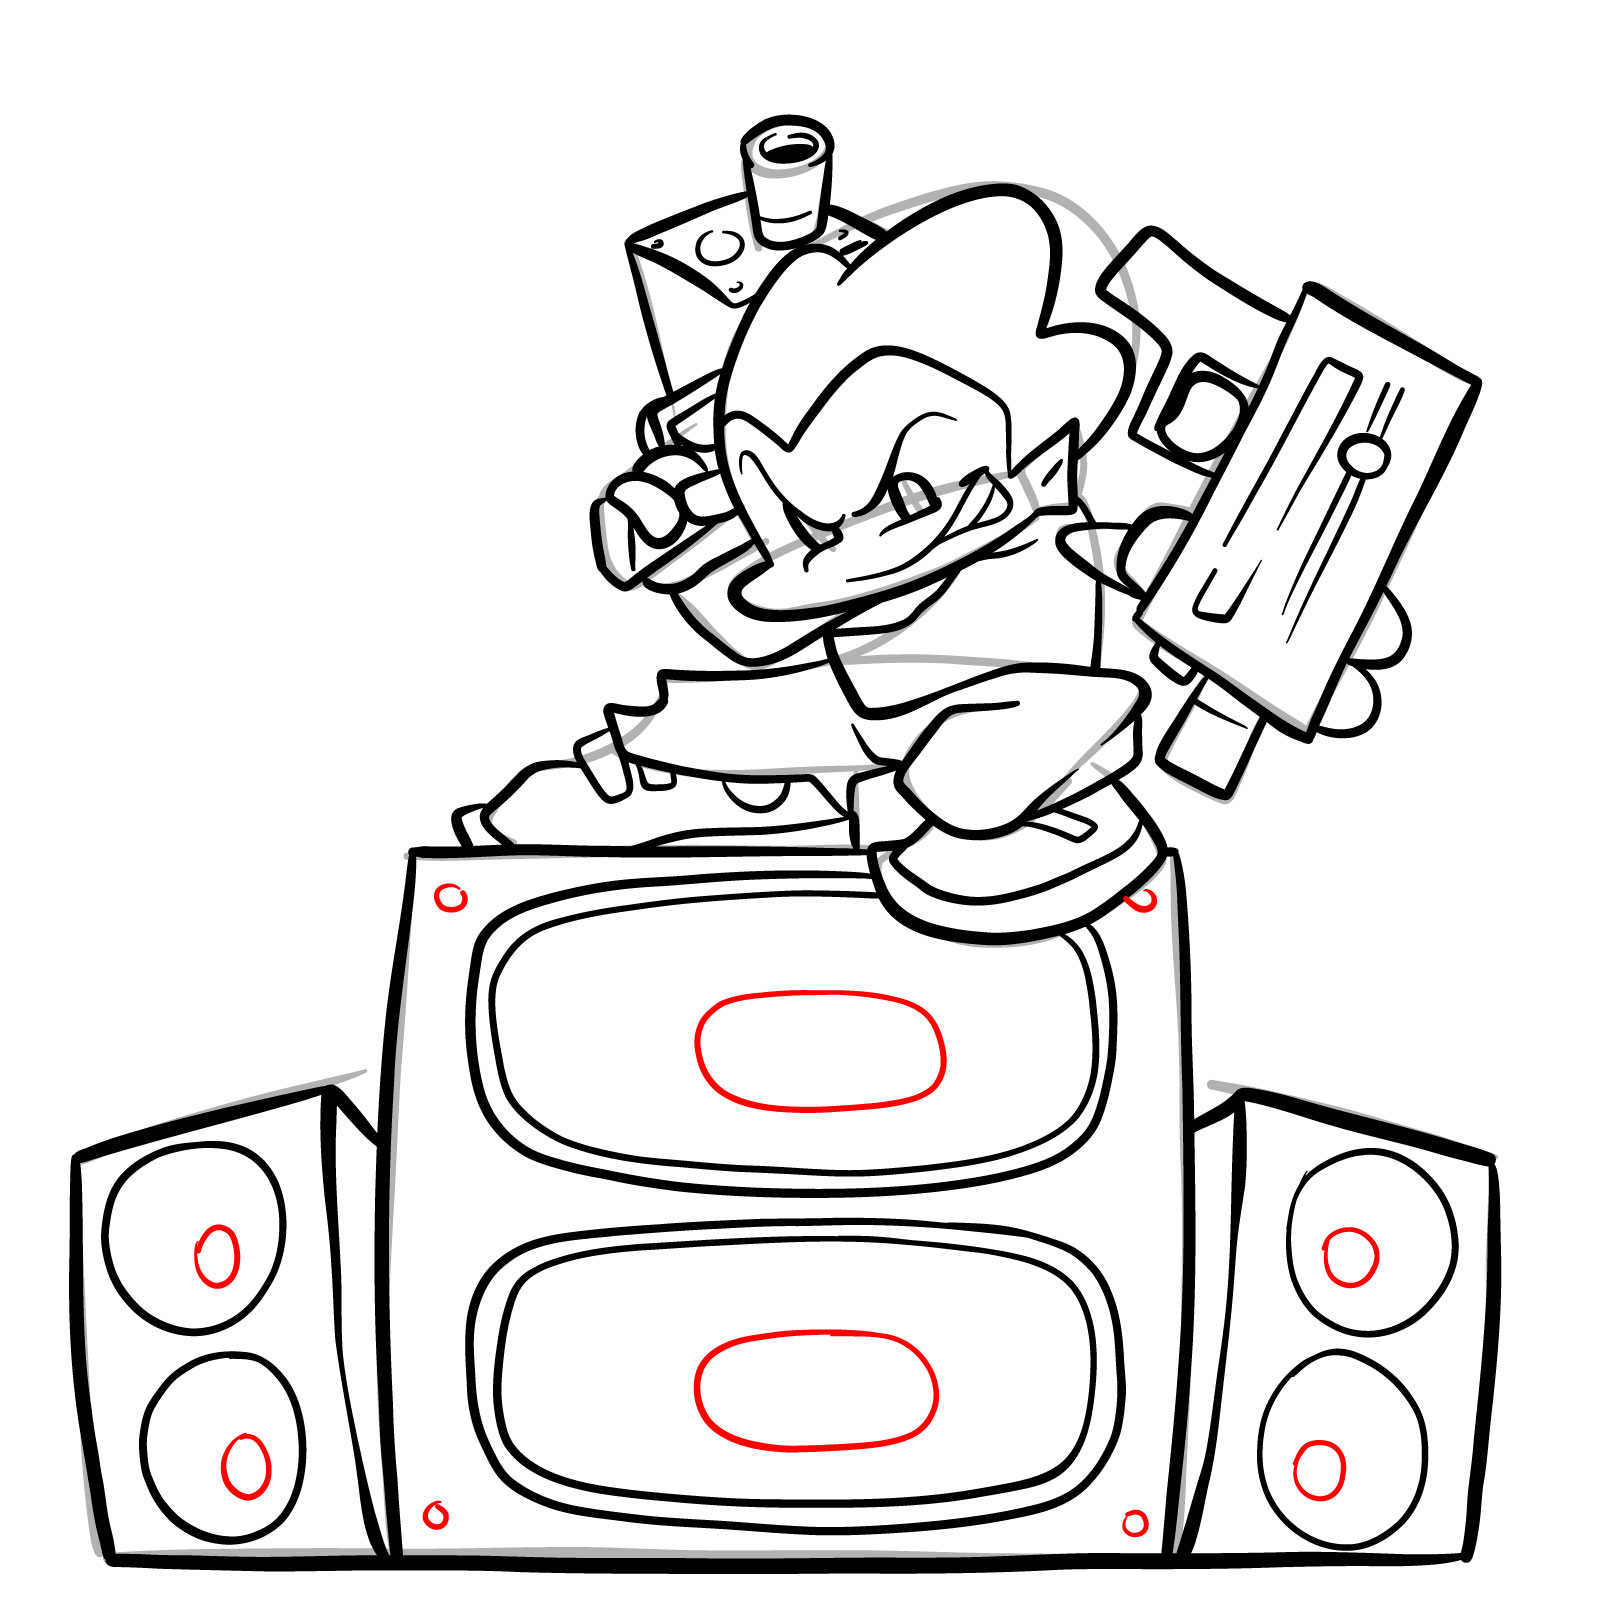 How to draw Pico on the speakers - step 29